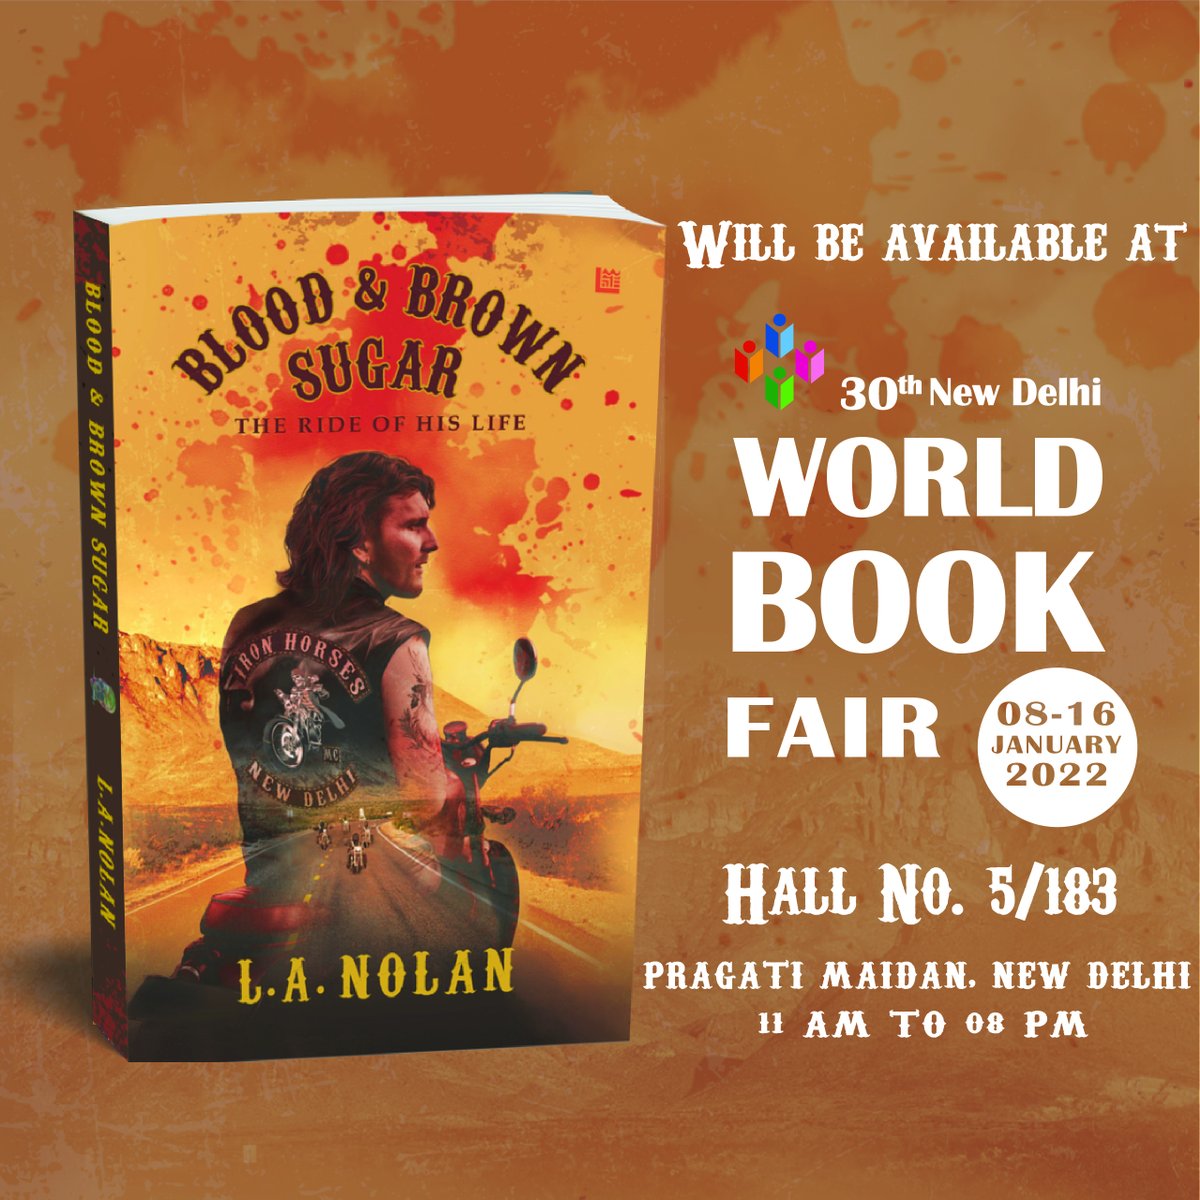 I am pleased to announce that Blood & Brown Sugar will be on display at the New Delhi World Book Fair.  If you are attending, do drop by and pick up a copy. If you would like it signed, I will be in attendance on January 8th at 12:00.
#writerscommunity #newdelhibookfair